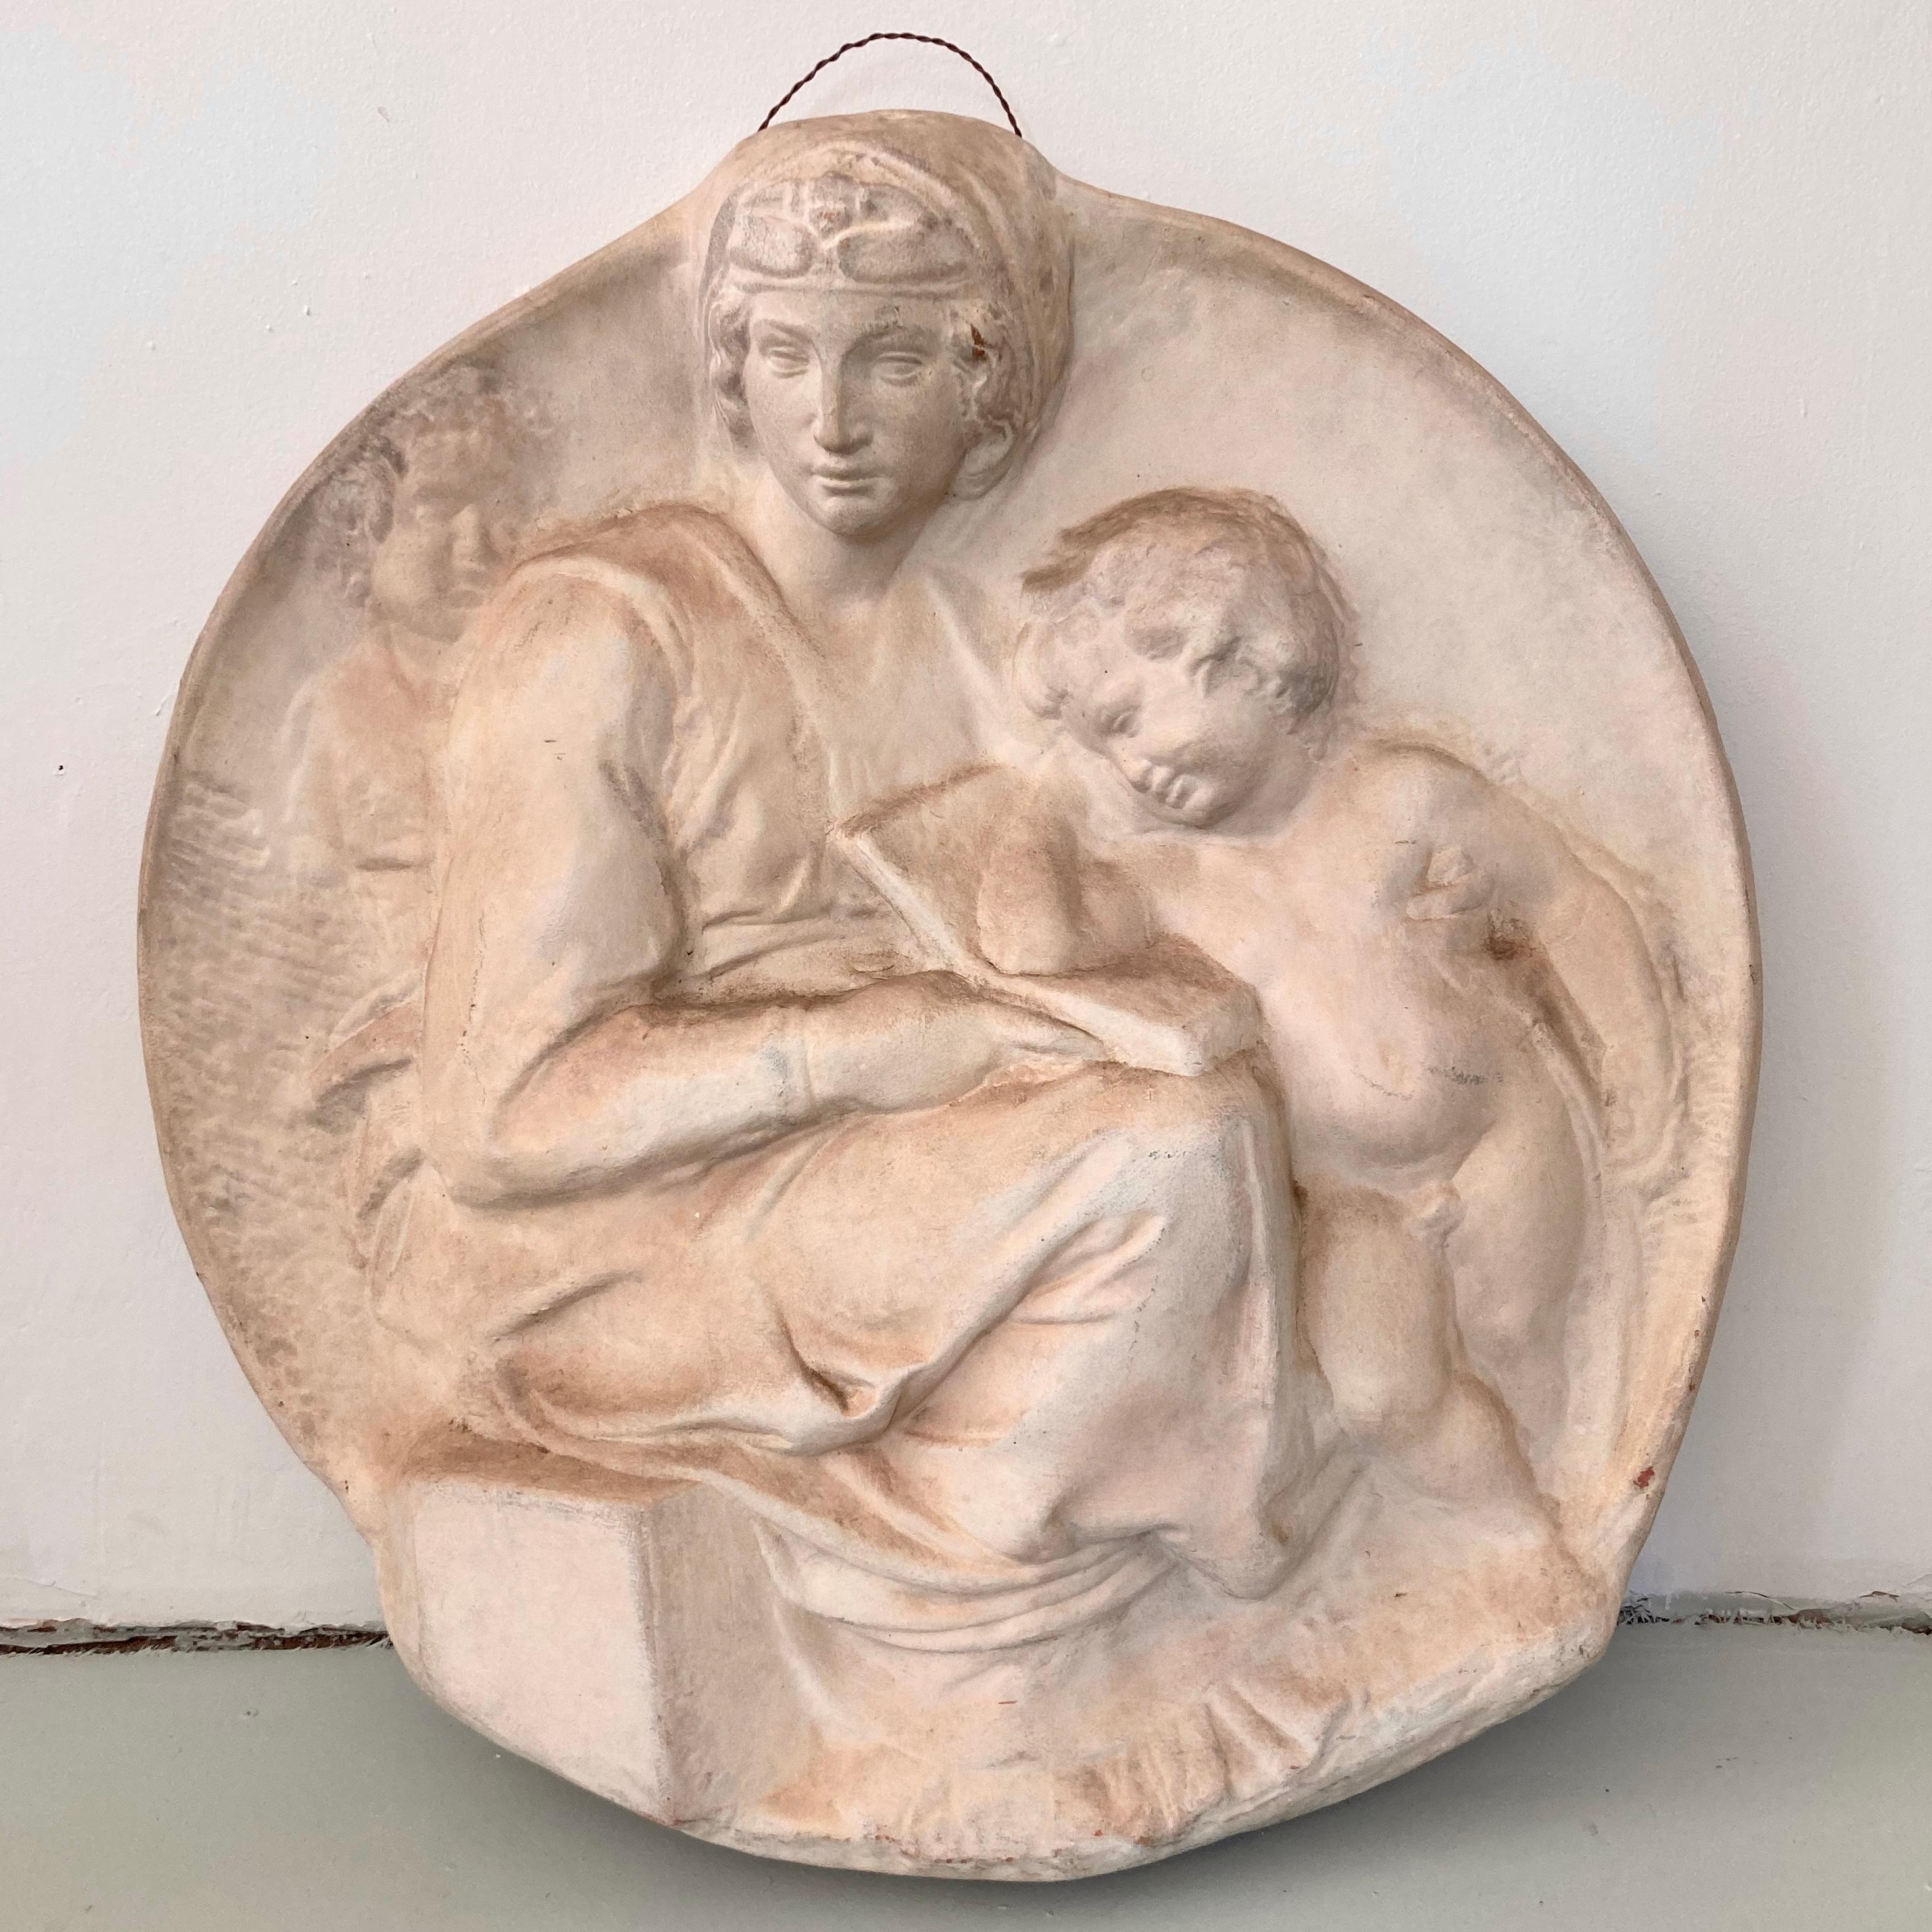 Beautiful mate glazed terra cotta wall hanging. Great carving details of the Madonna and the Child.